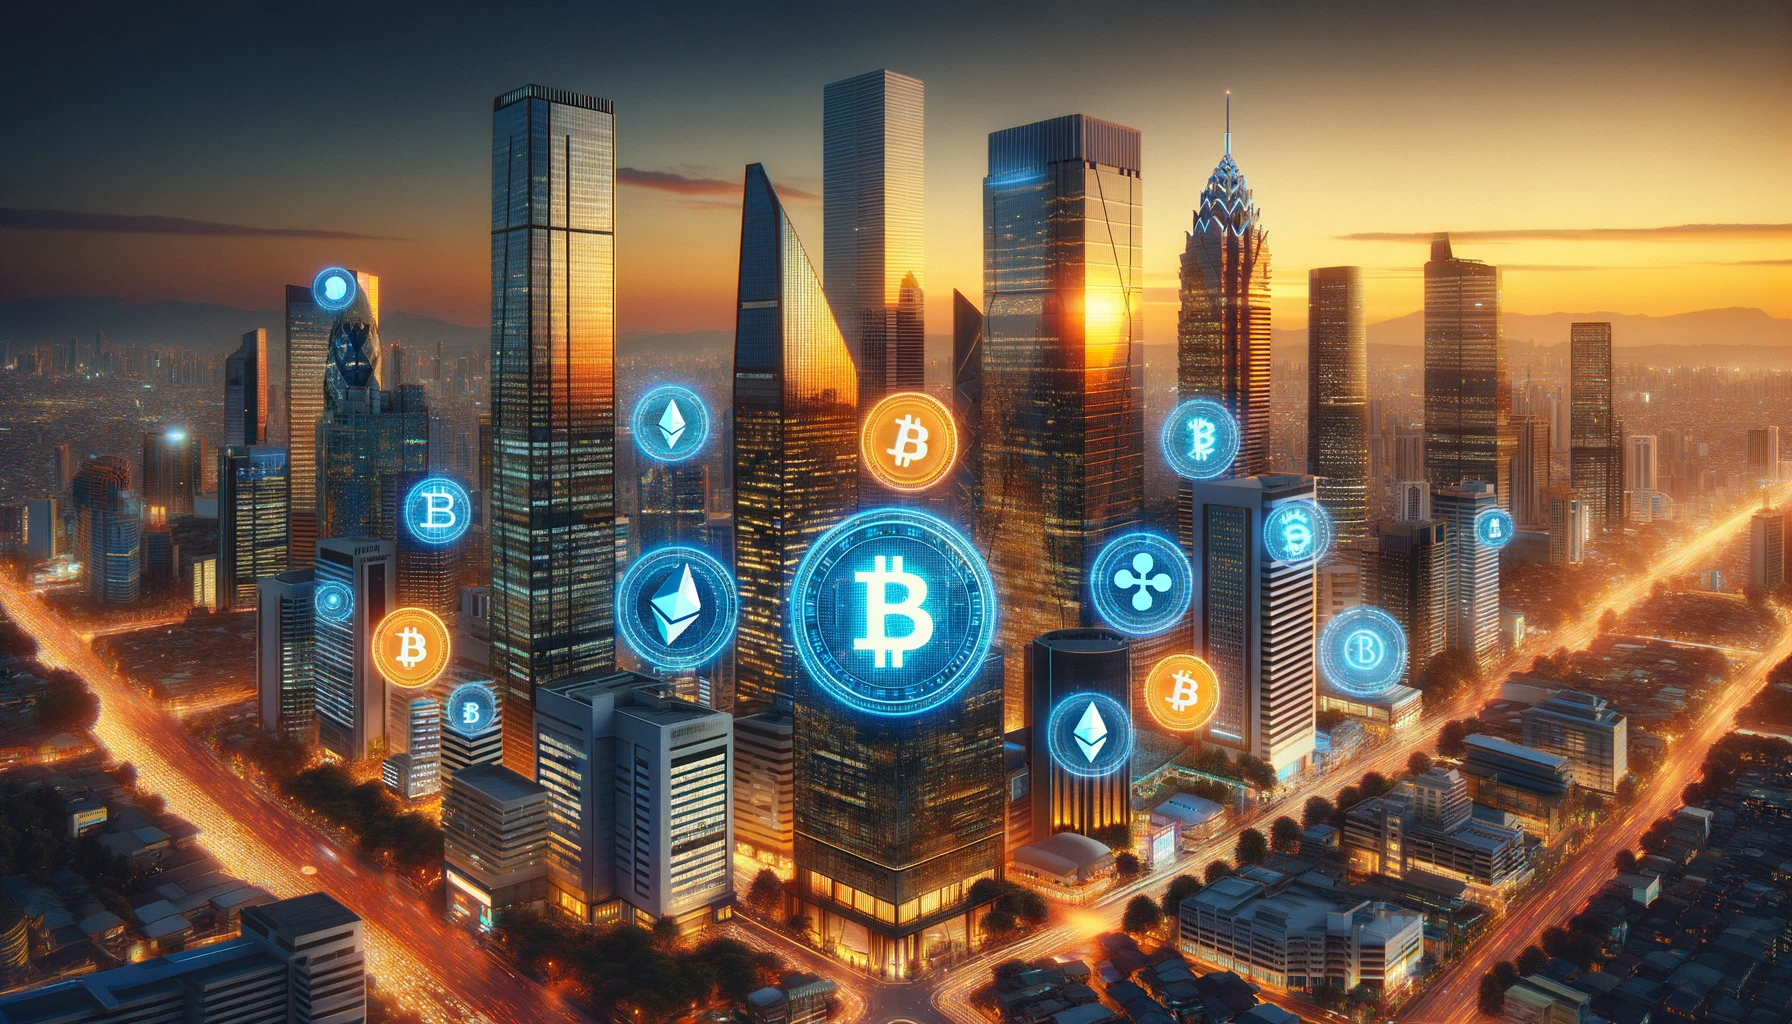 This image, created by an AI, shows a city at sunset with tall buildings. It has bright lights and cryptocurrency logos like Bitcoin and Ethereum on signs.